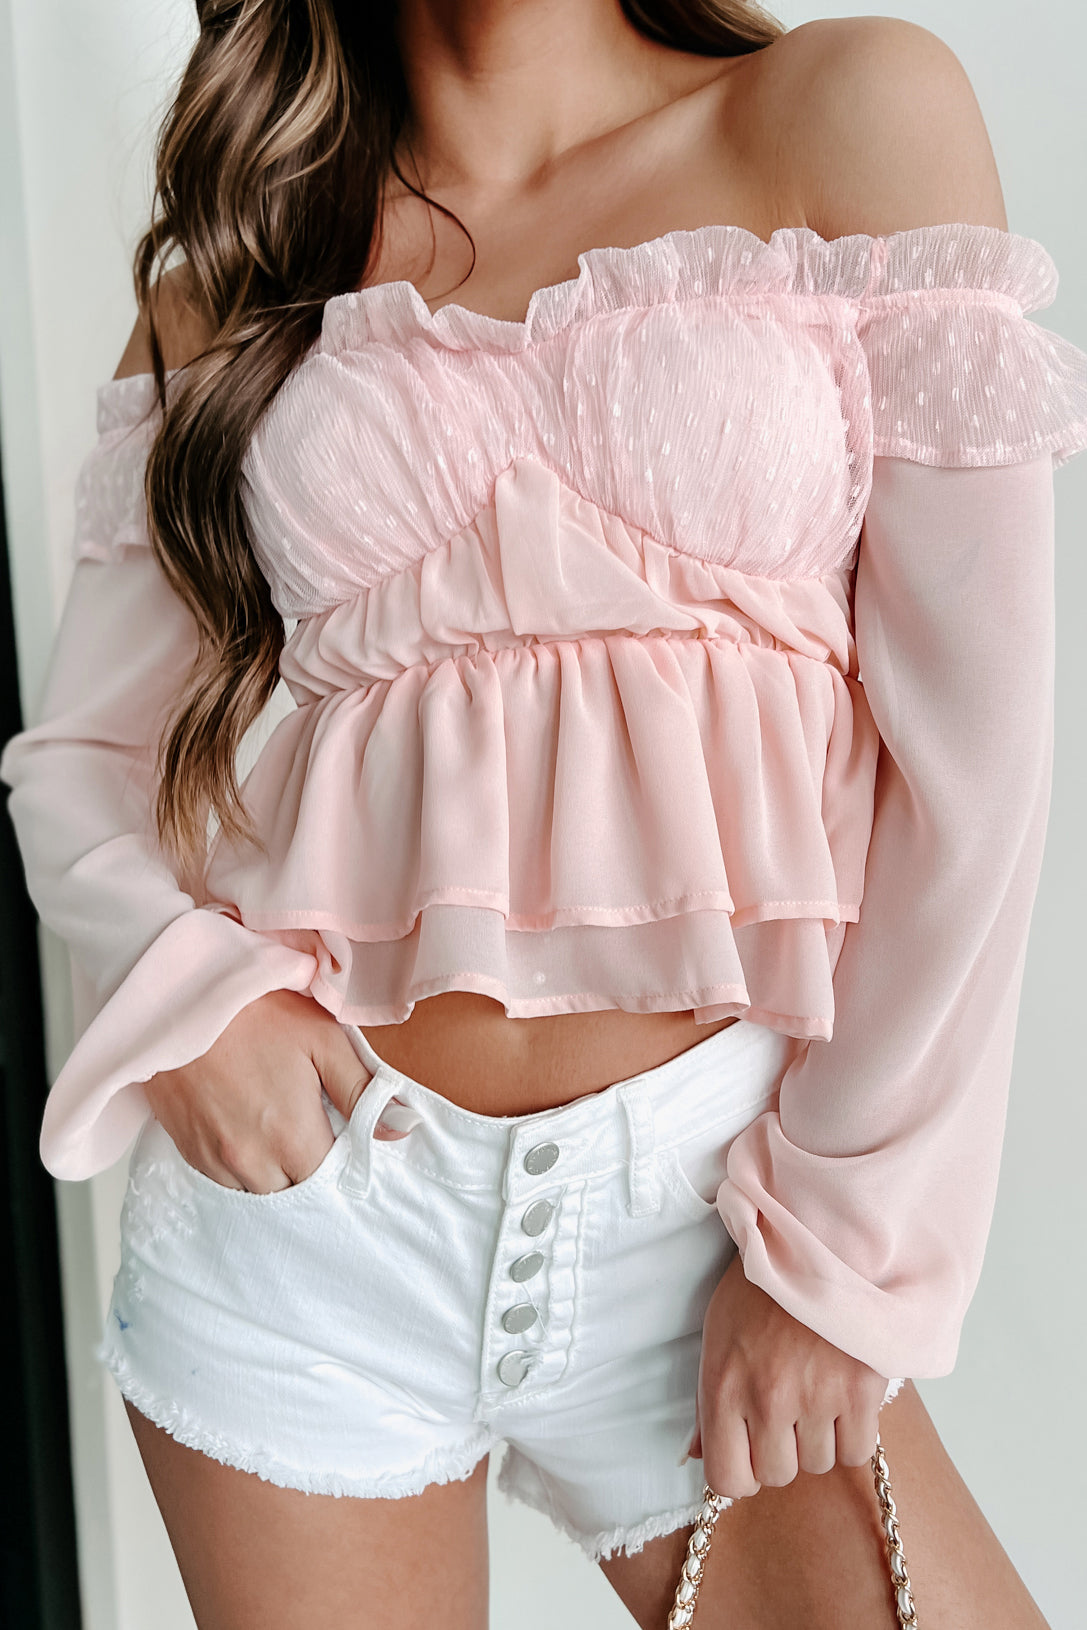 My Favorite Ruffled Top for Summer, $42